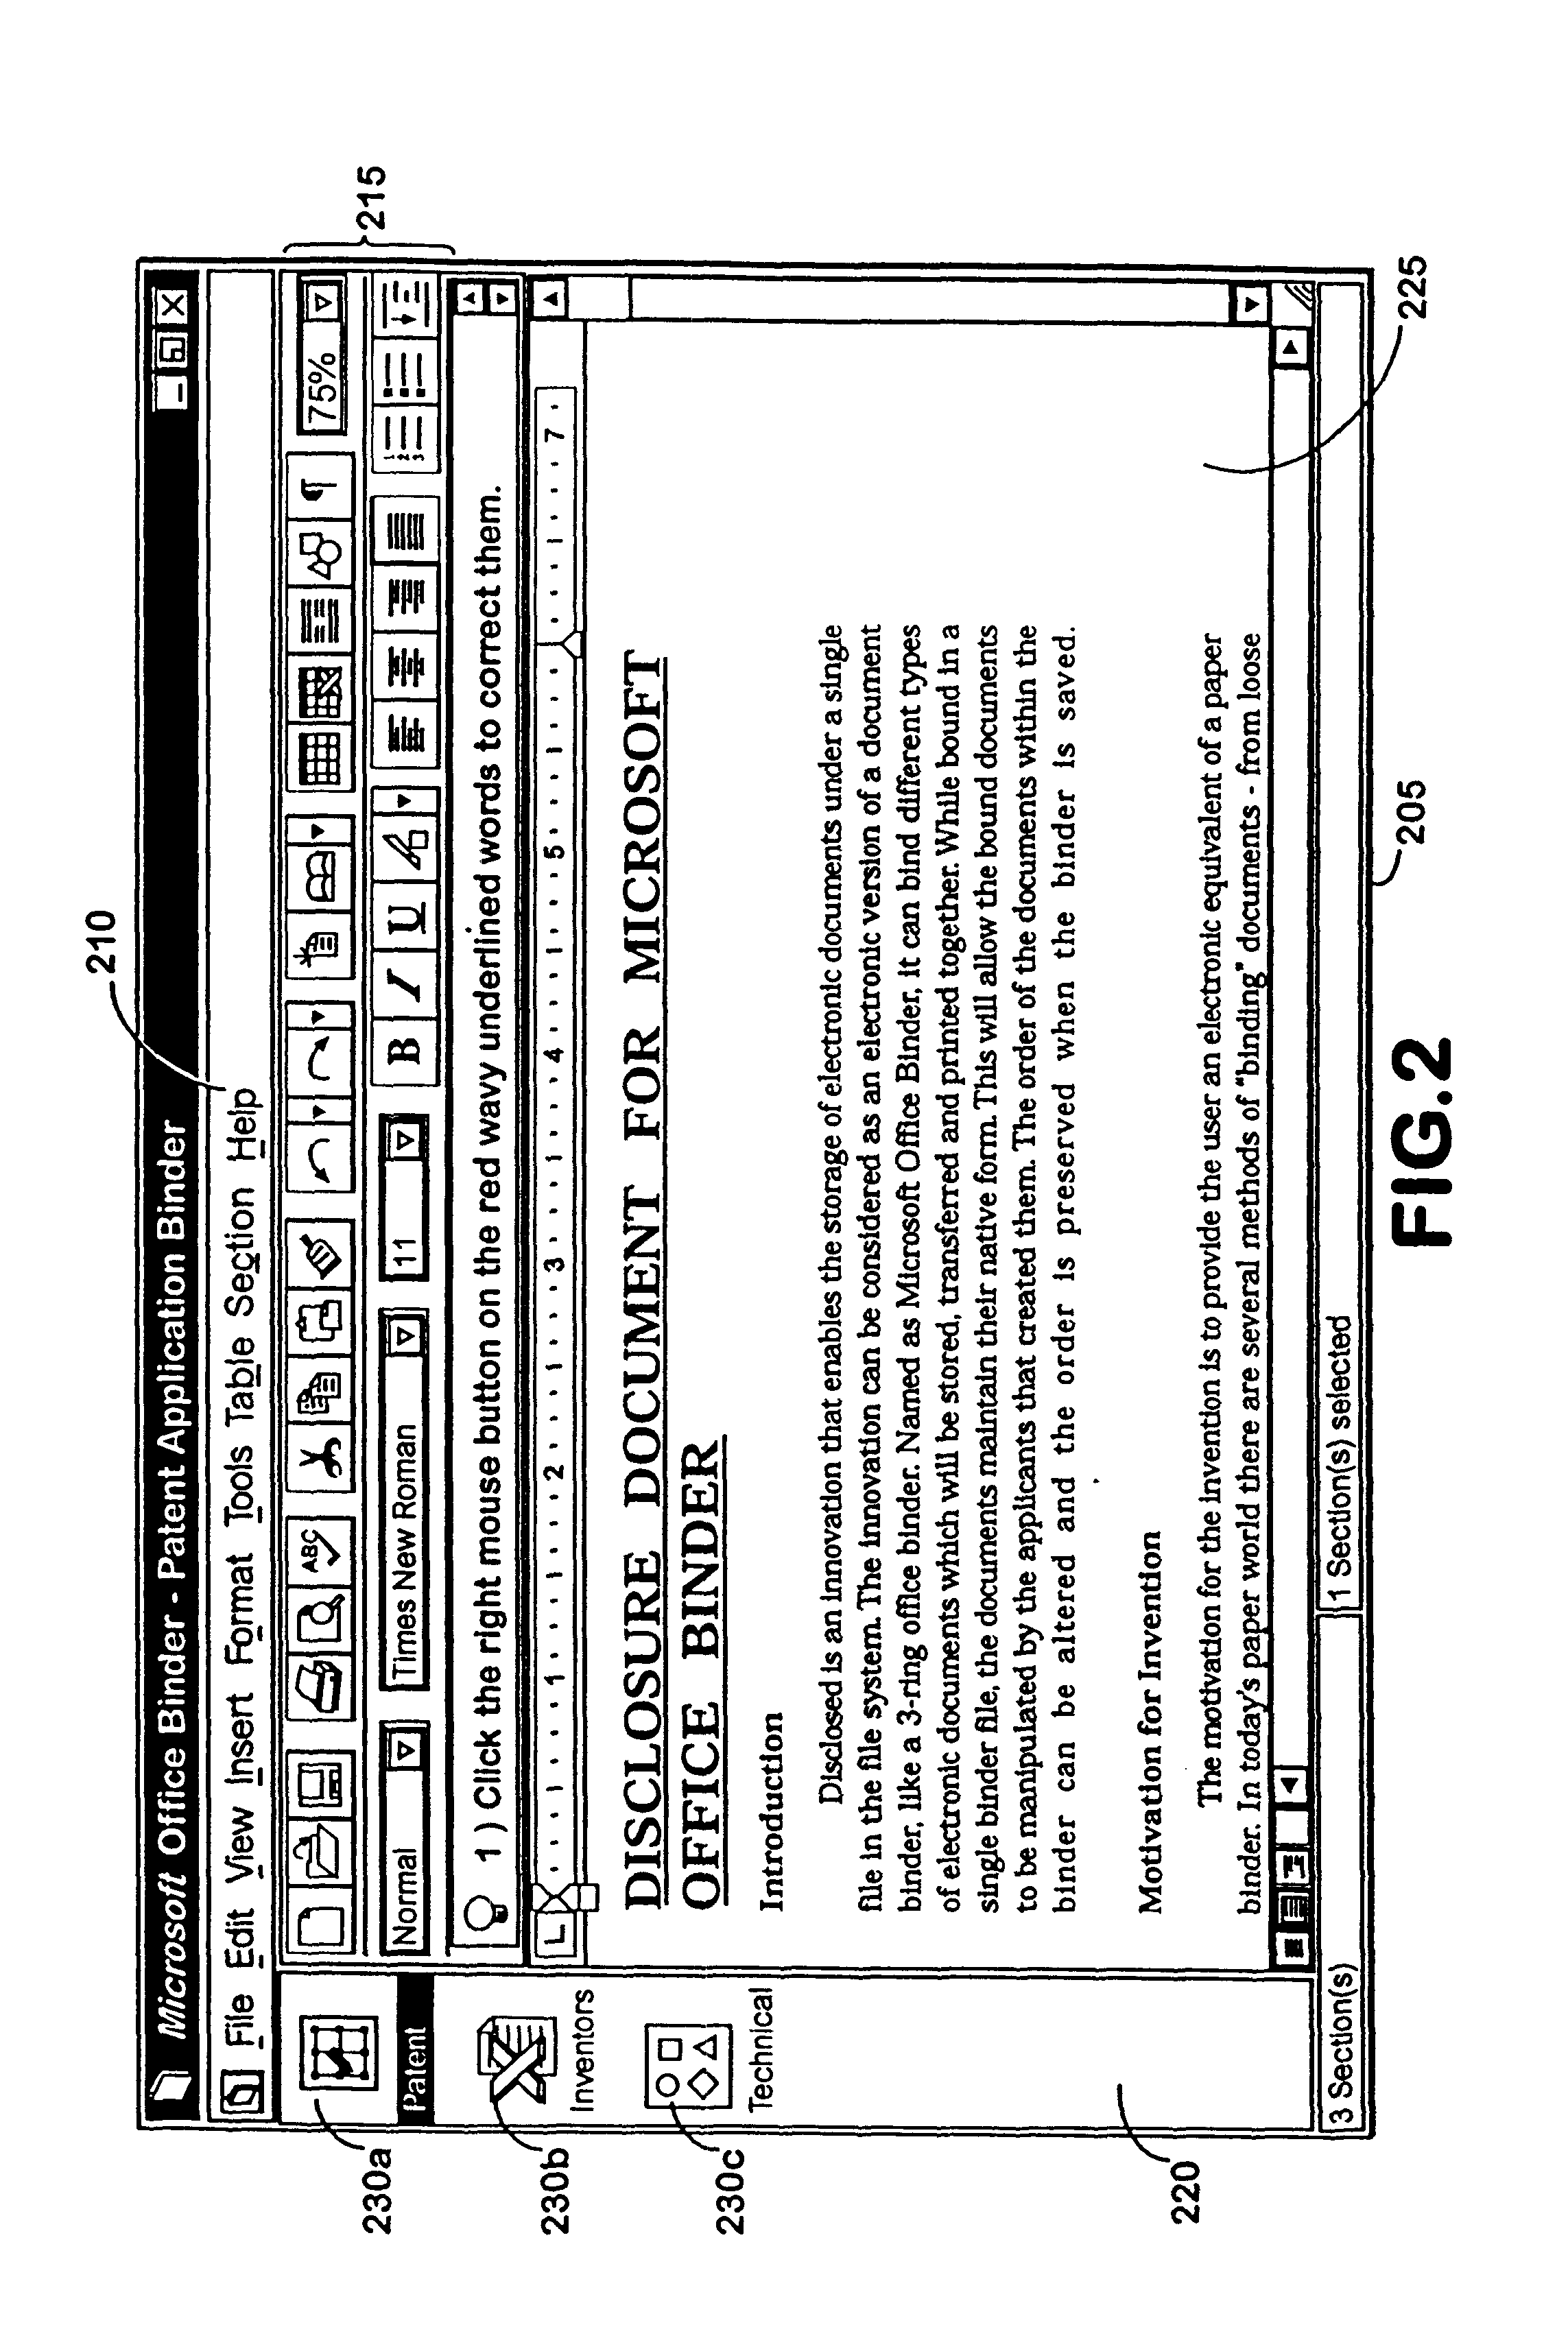 System and method for printing ordered sections having different file formats